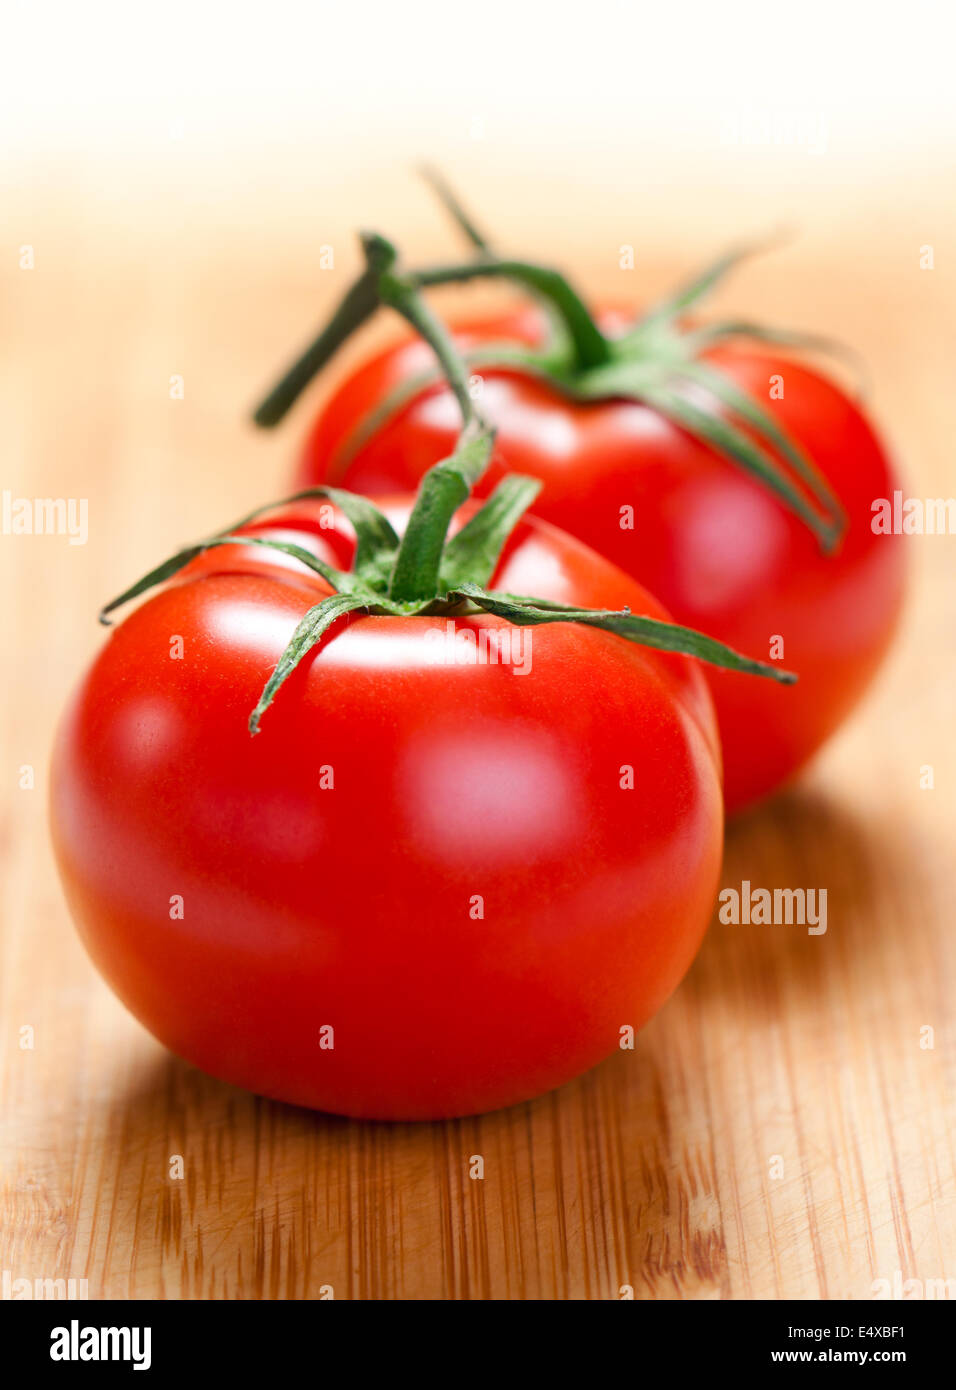 Two tomatoes on the board. Stock Photo